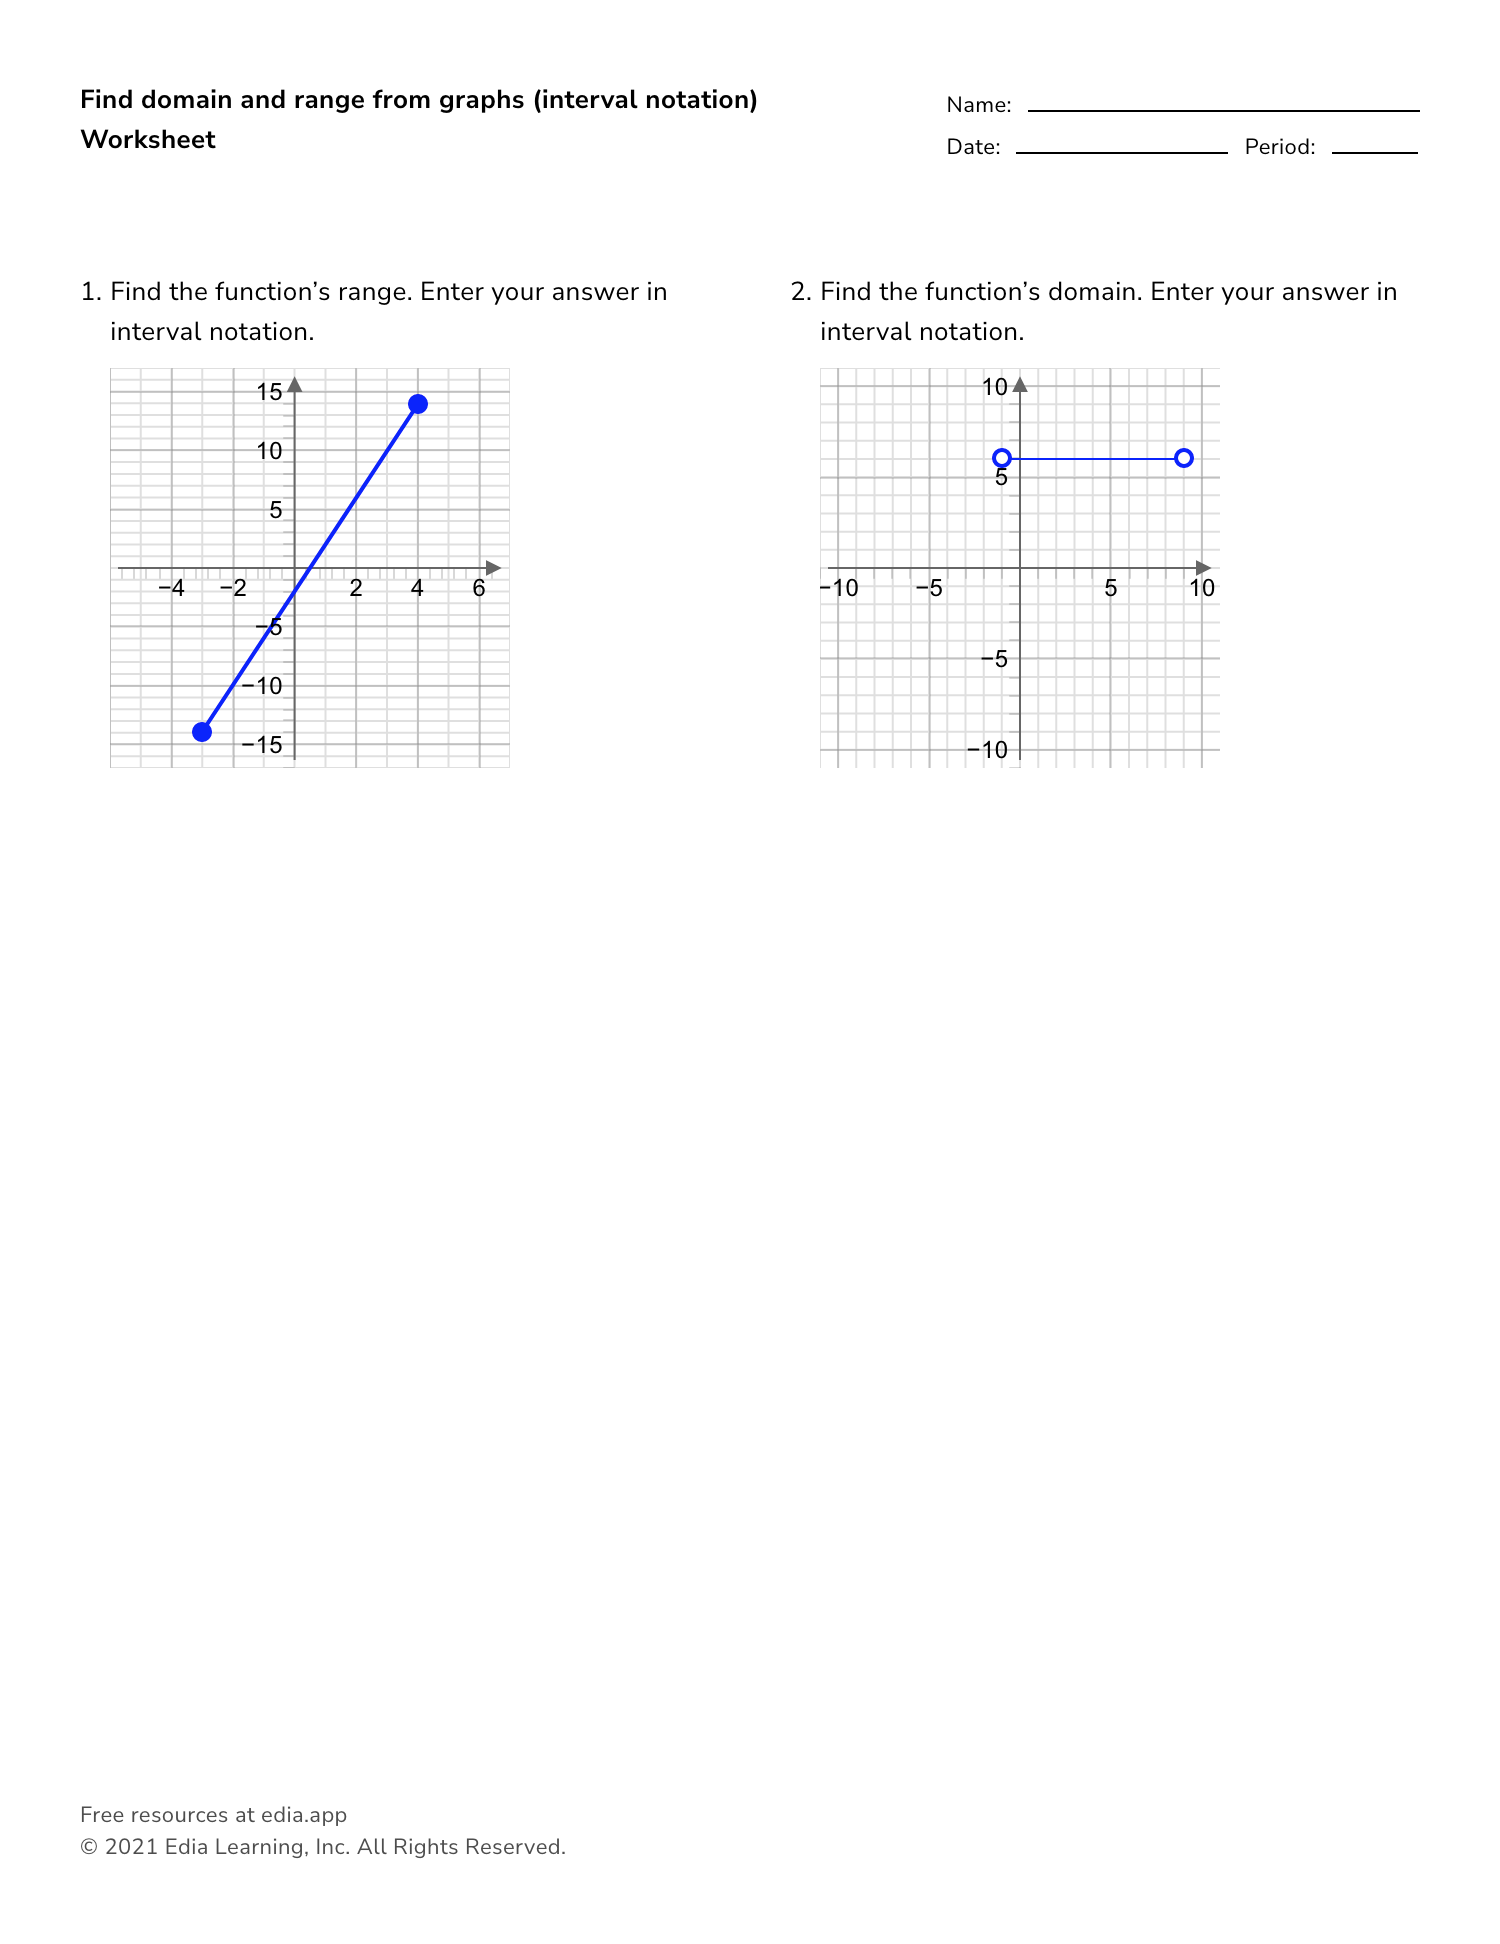 Find Domain And Range From Graphs (interval Notation) - Worksheet For Interval Notation Worksheet With Answers